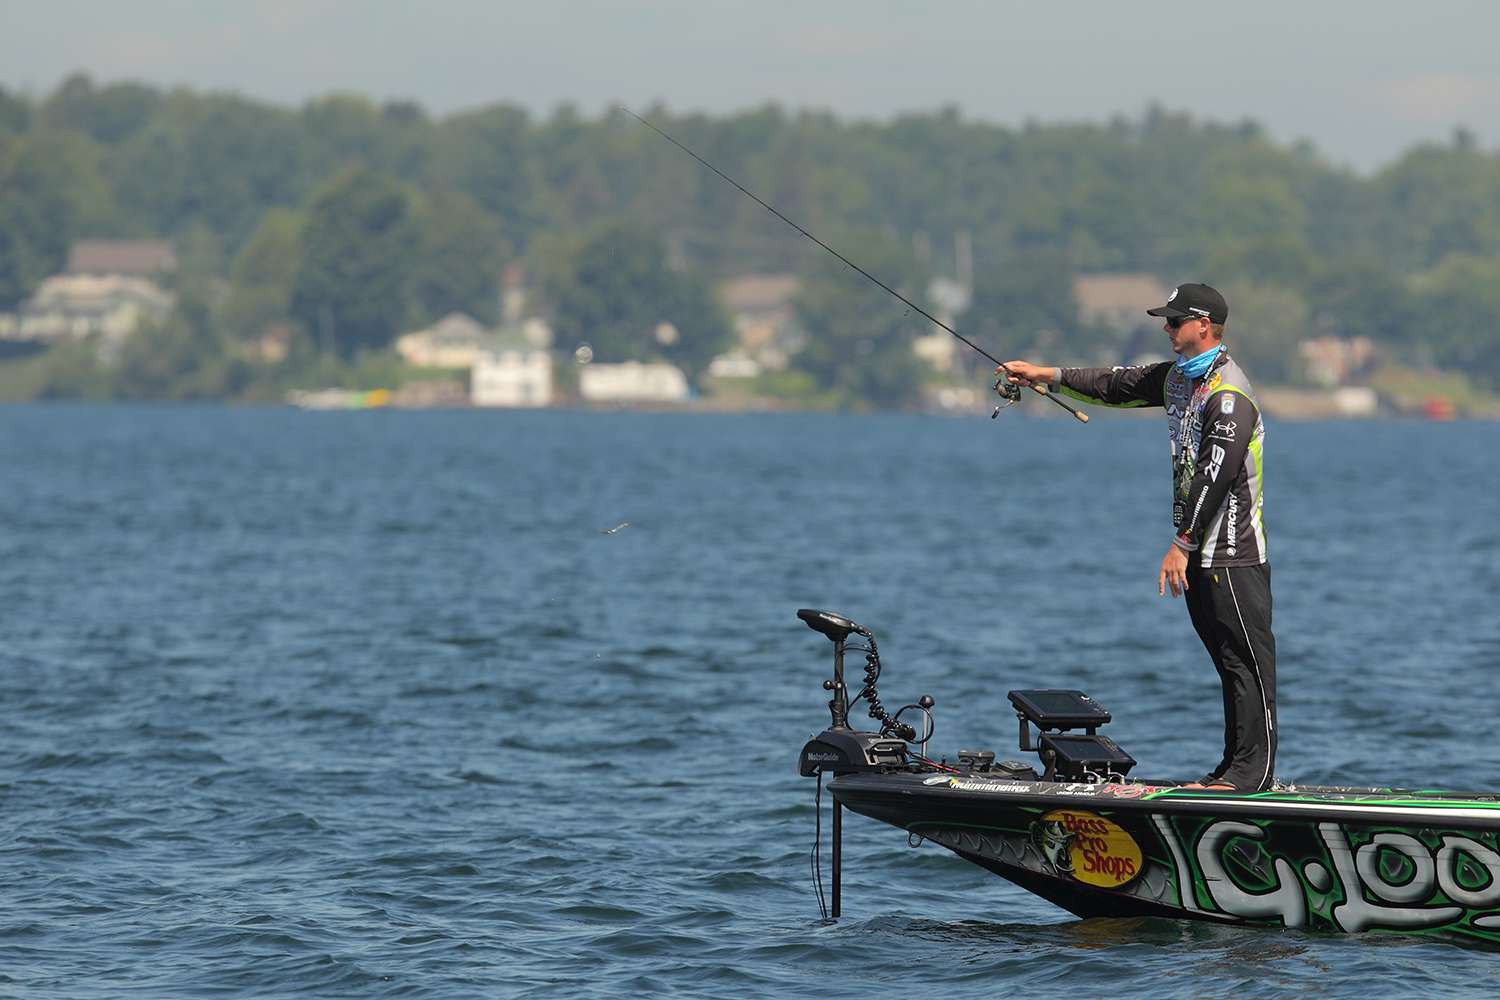 JVD has already made two appearances in the GEICO Bassmaster Classic presented by GoPro, and he was one spot away from the 2016 event. Read on for a look inside the boat he uses to do all of his damage on the pro circuit.